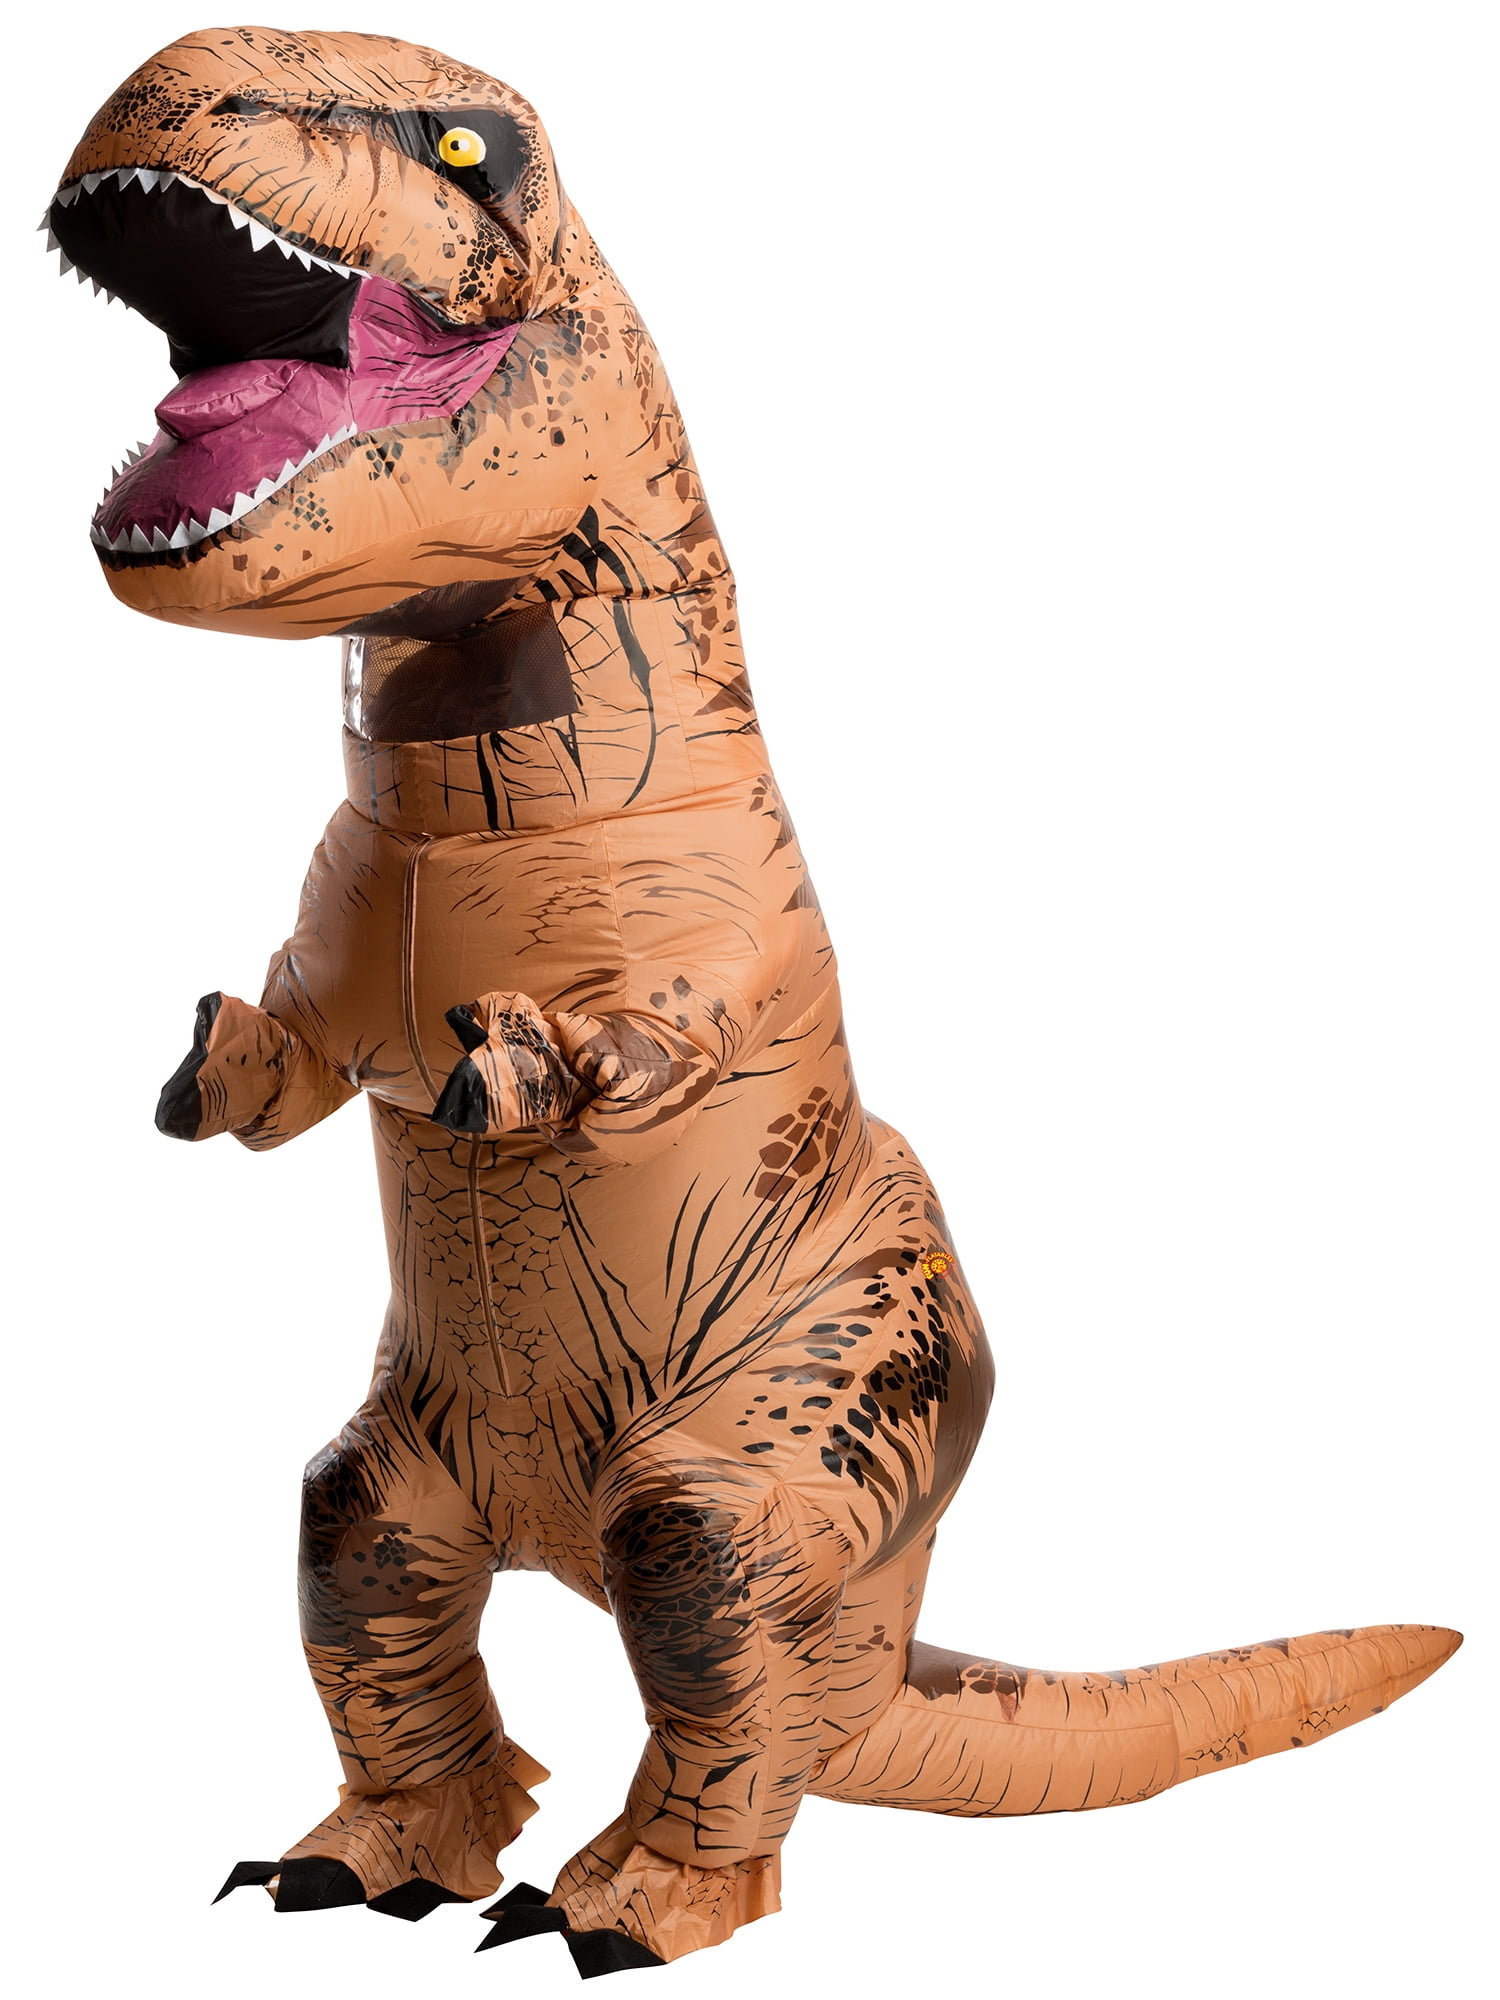 Adult Inflatable T-Rex with Sound Costume - Jurassic World